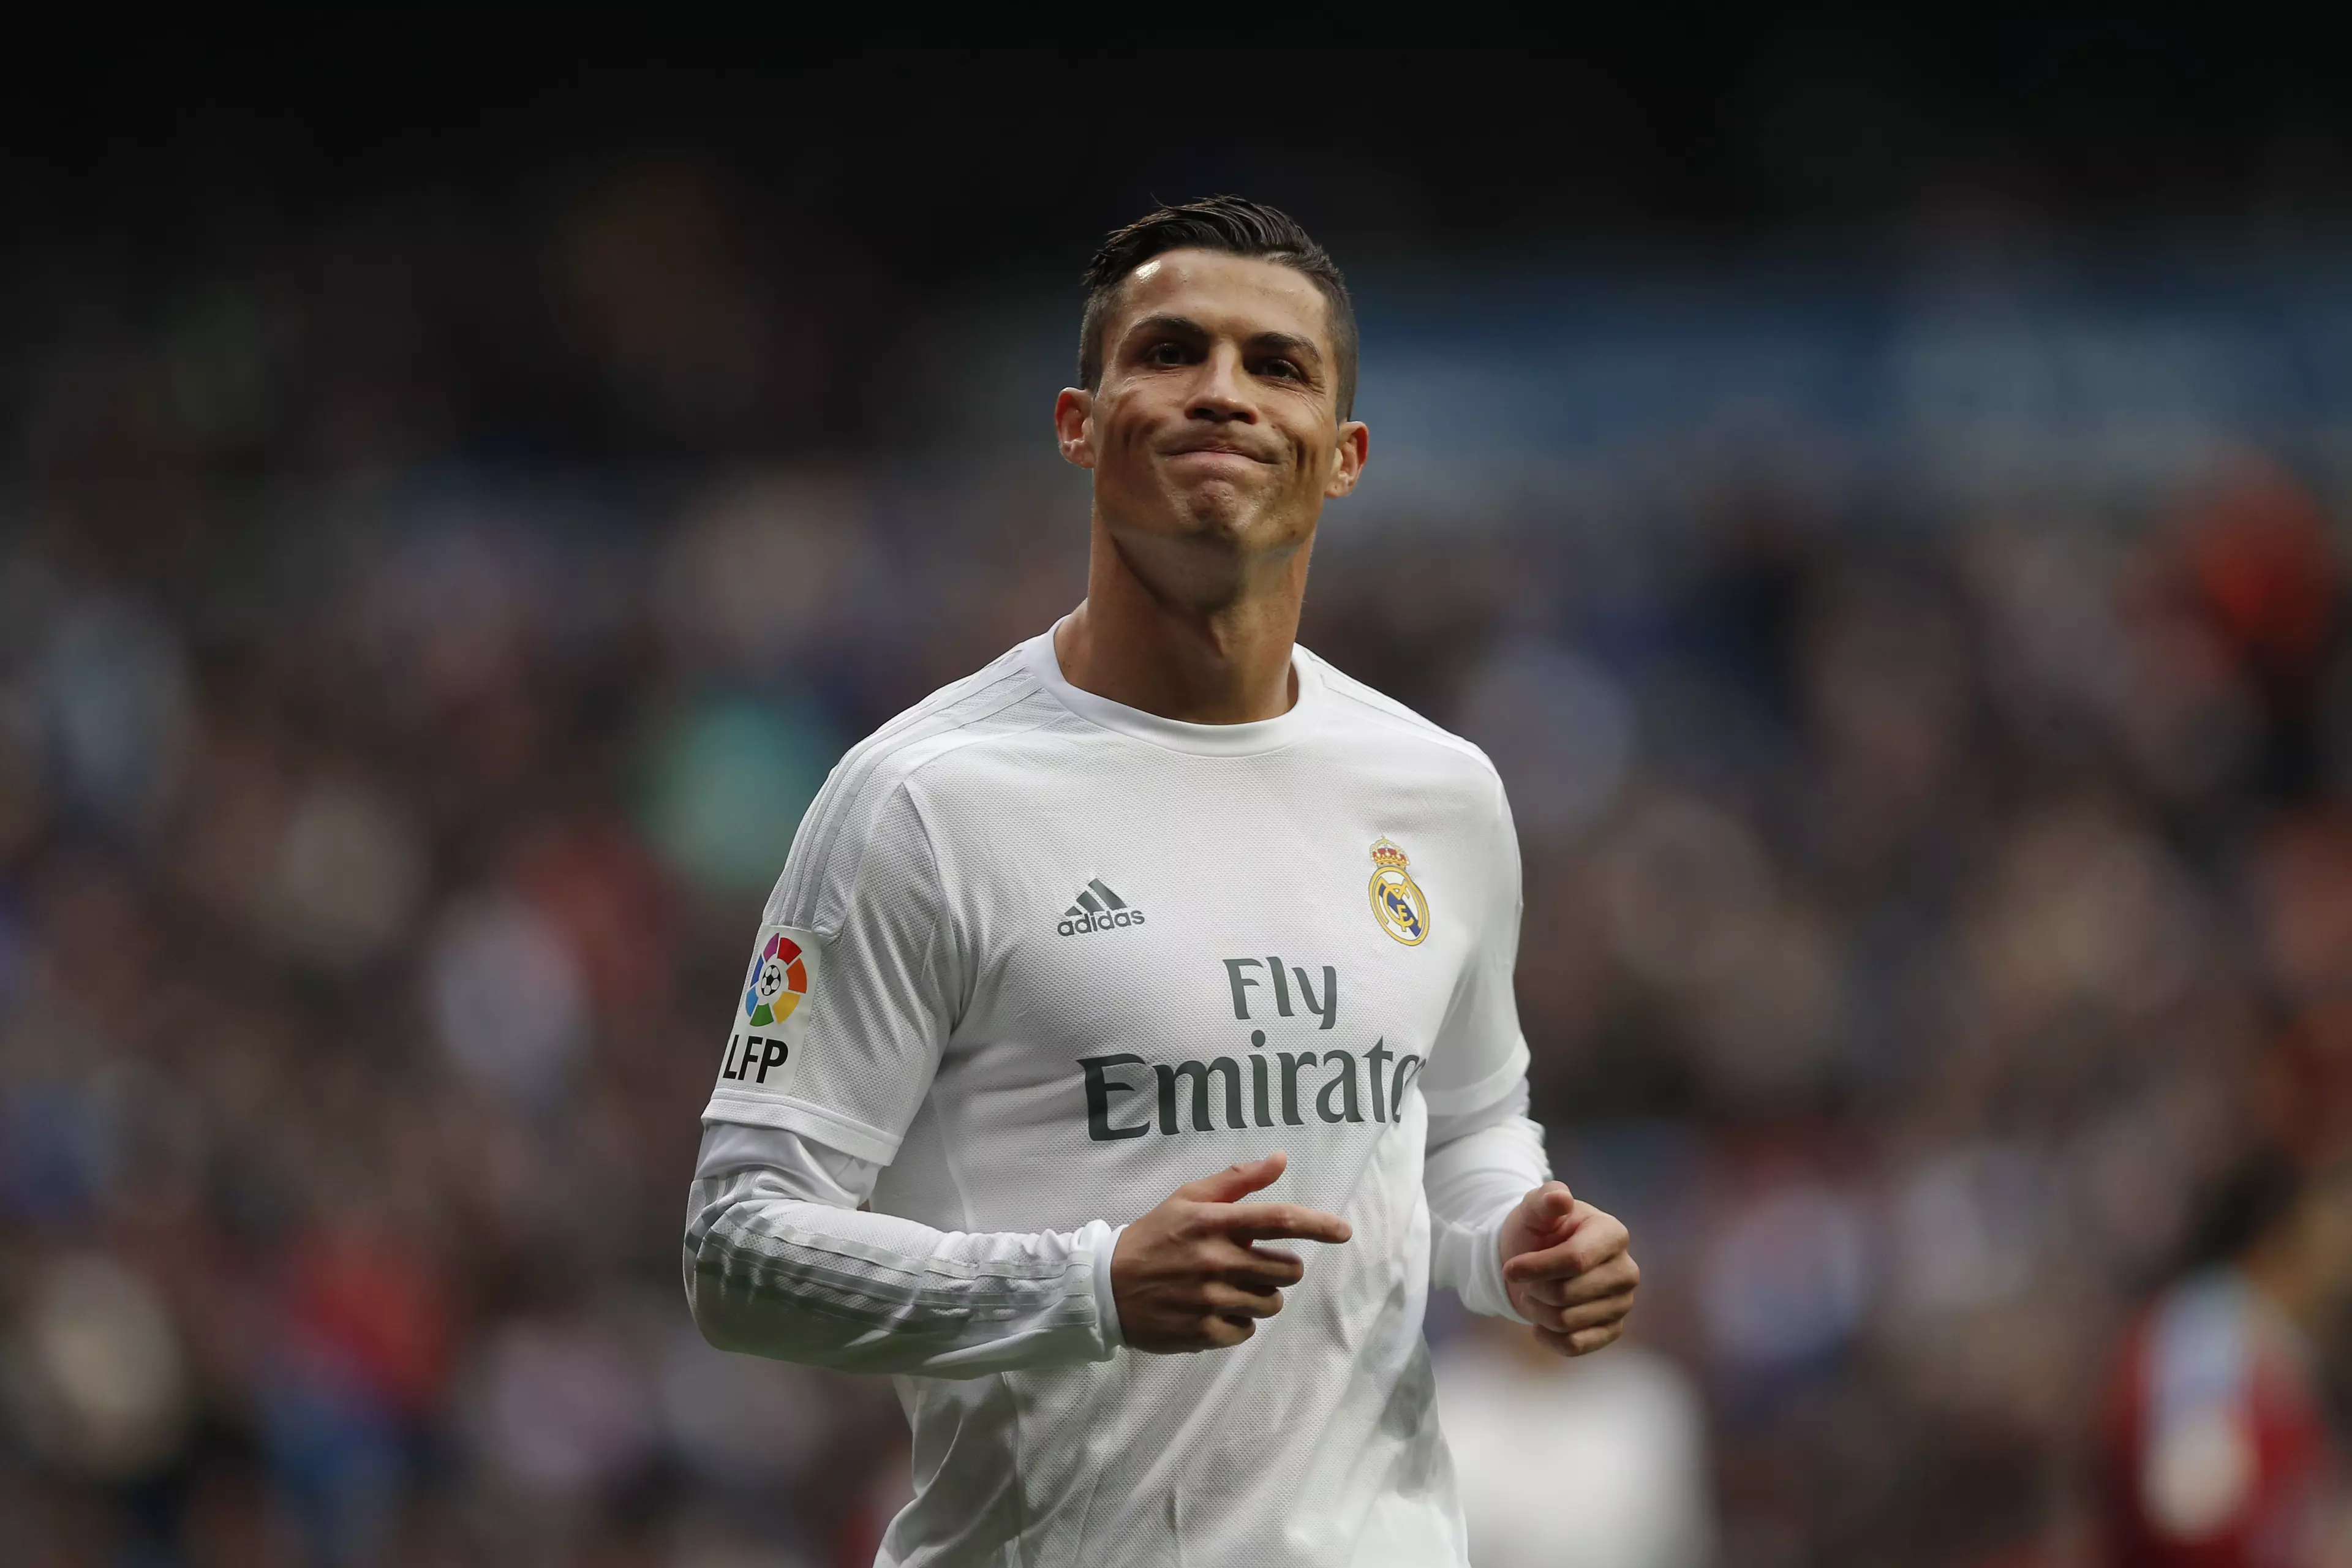 Spanish Press Speak Out About Cristiano Ronaldo's Possible Move To Juventus